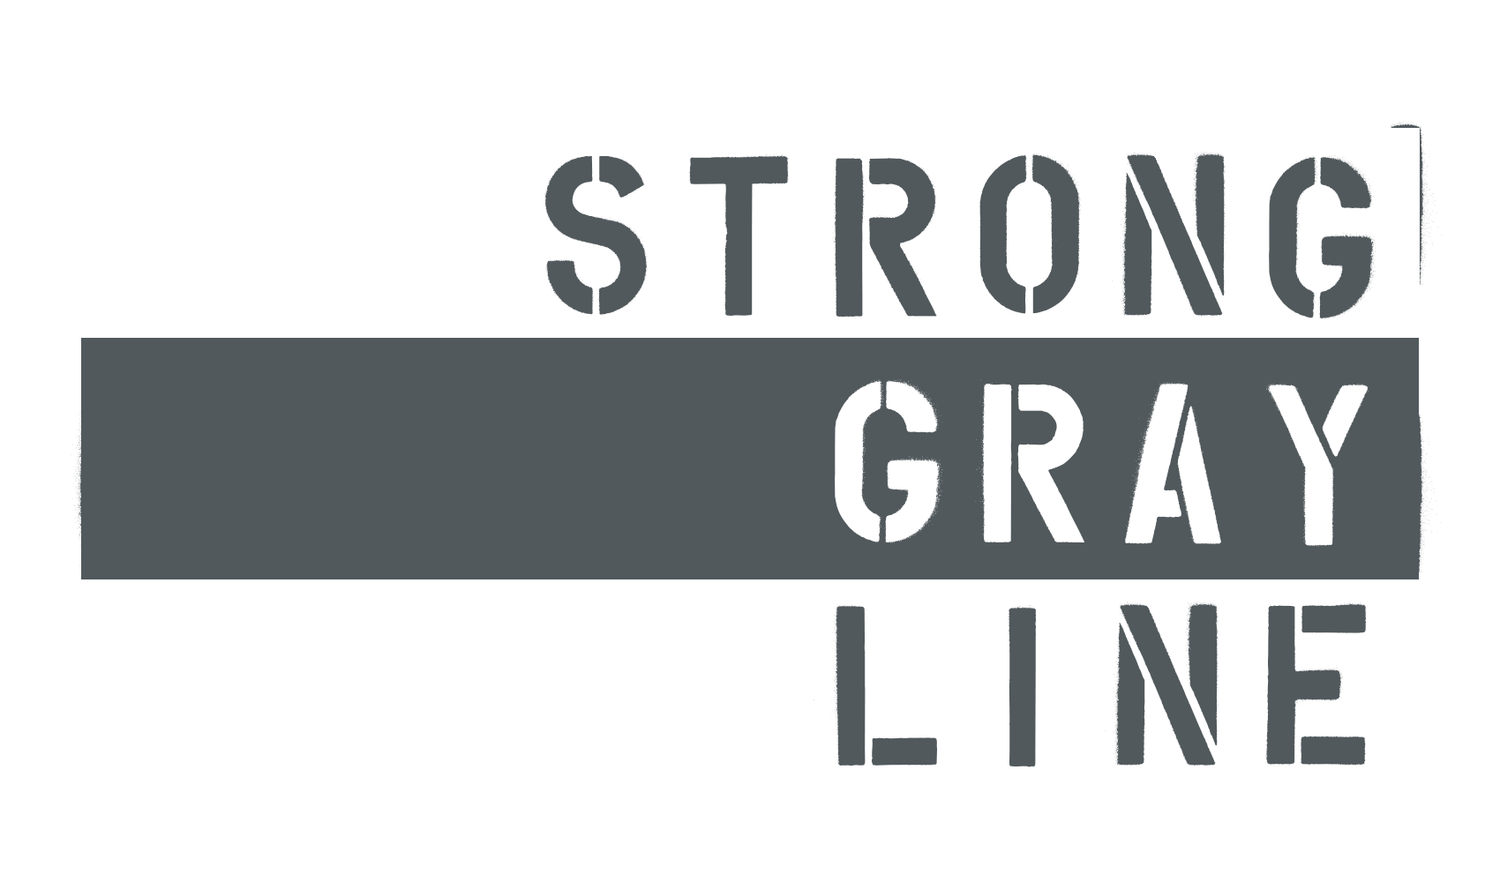 Strong Gray Line